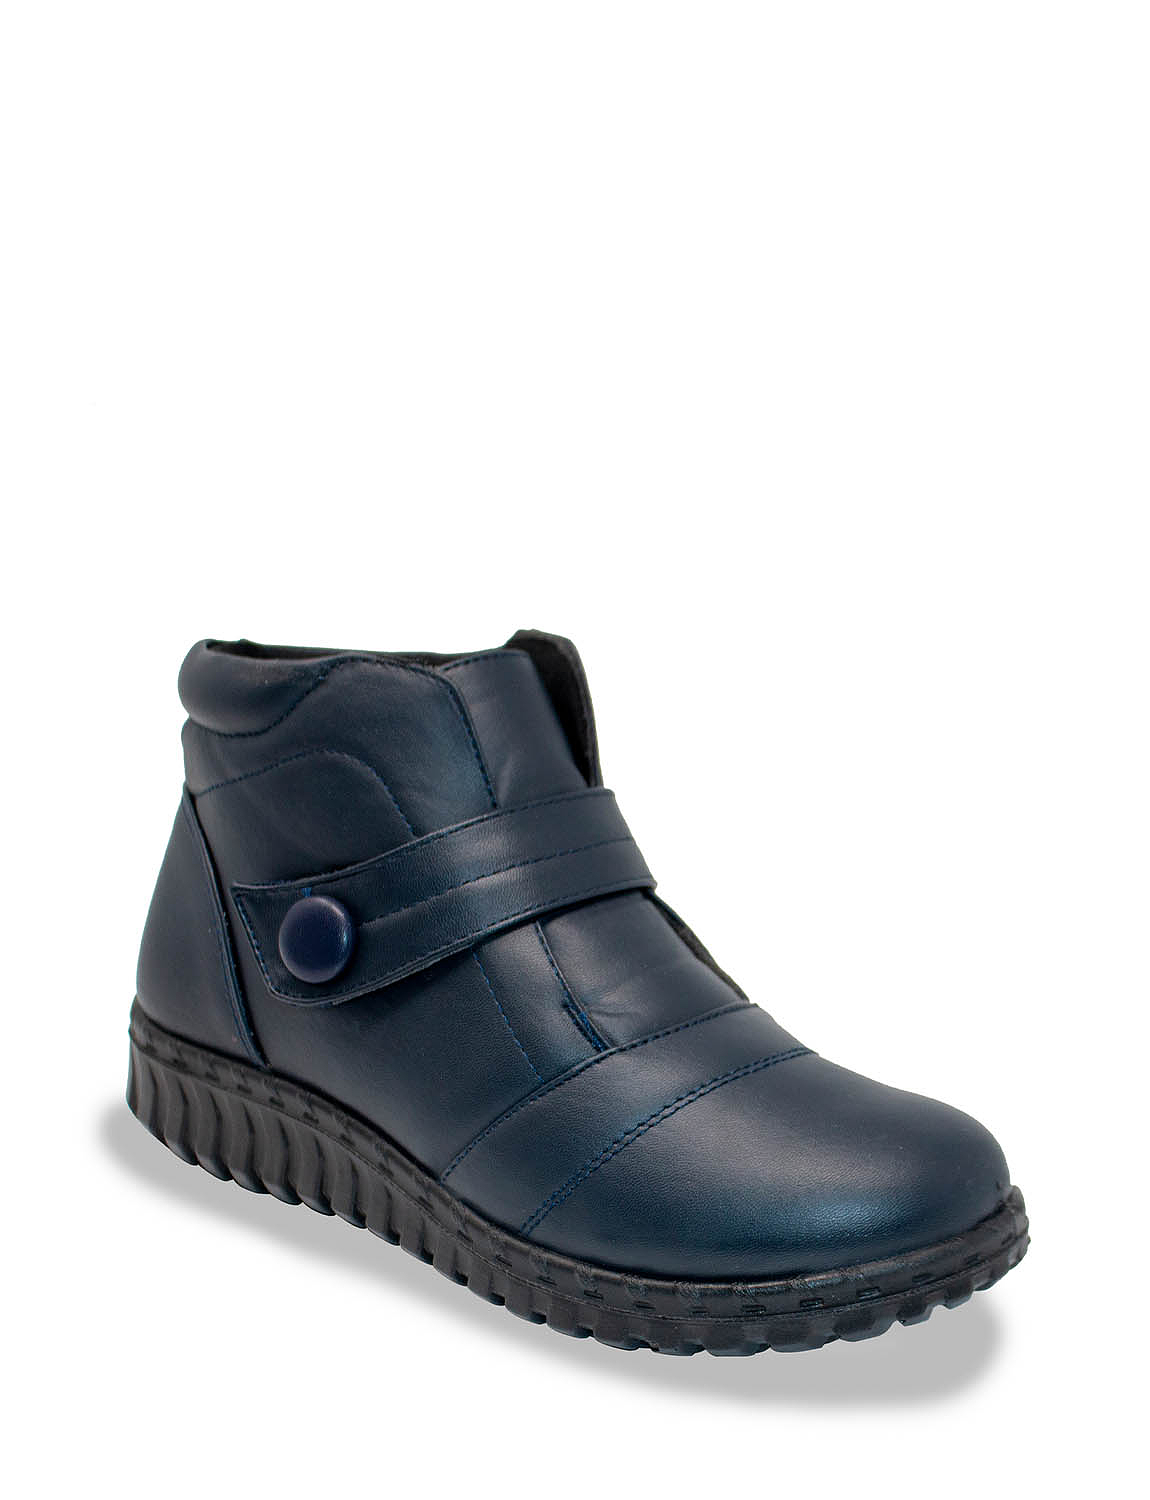 Dr Lightfoot Wide Fit Boot | Chums